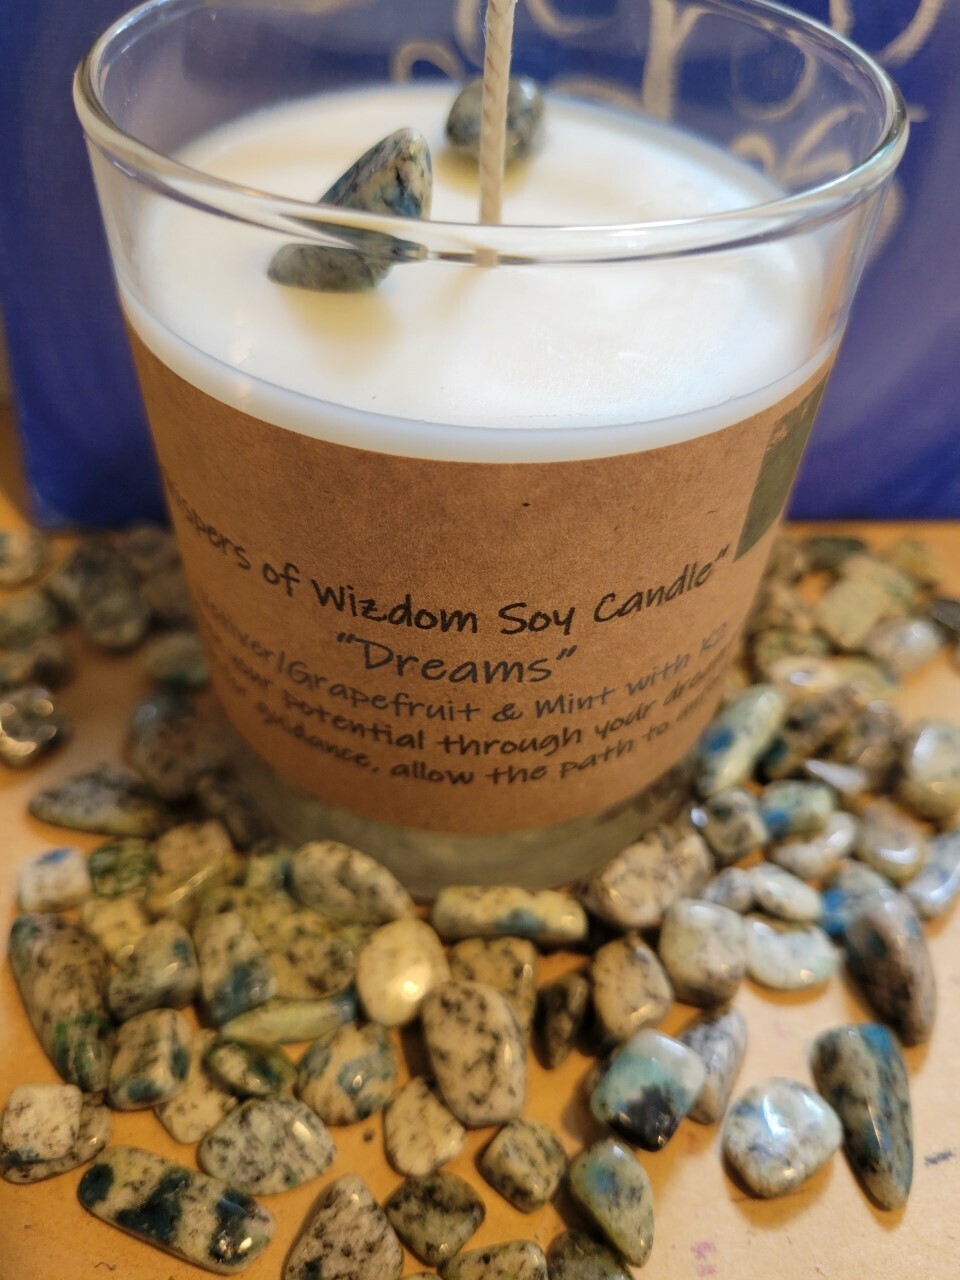 Judy's Soy Candle -Dreams